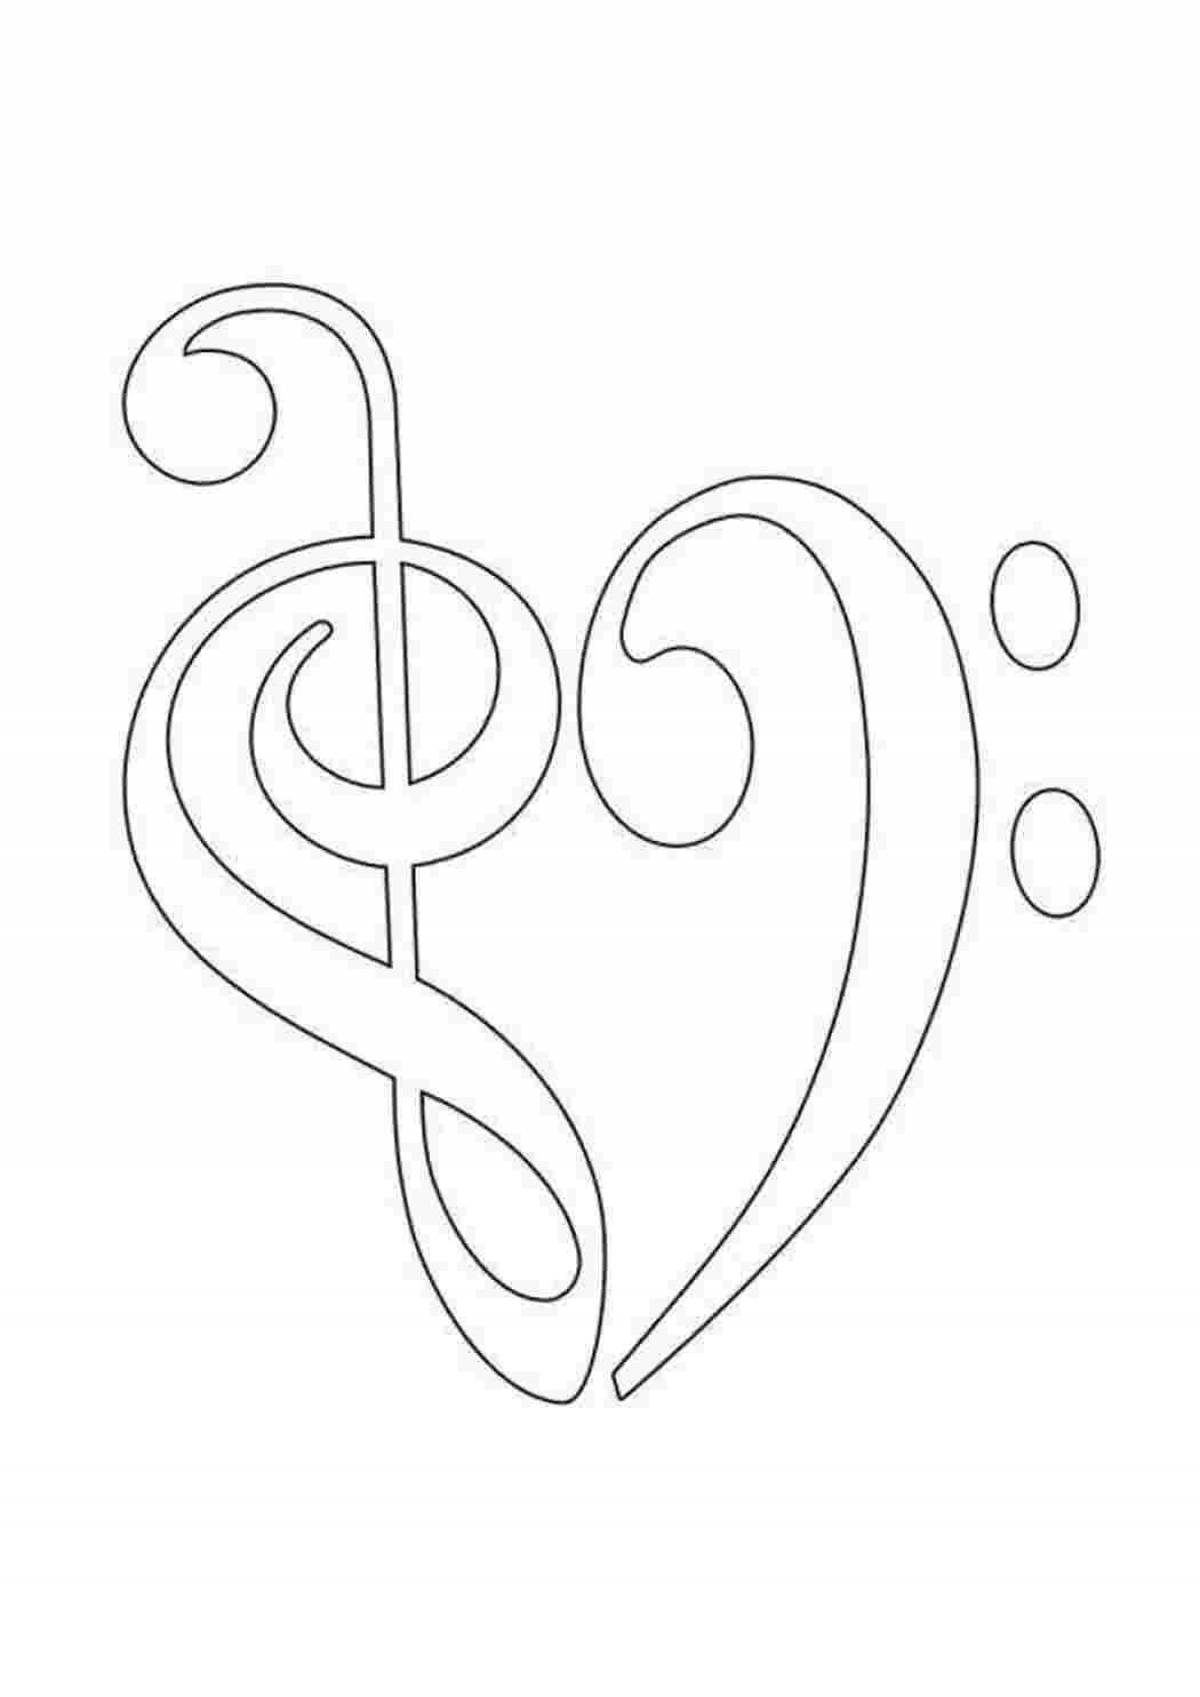 Coloring page joyful musical note